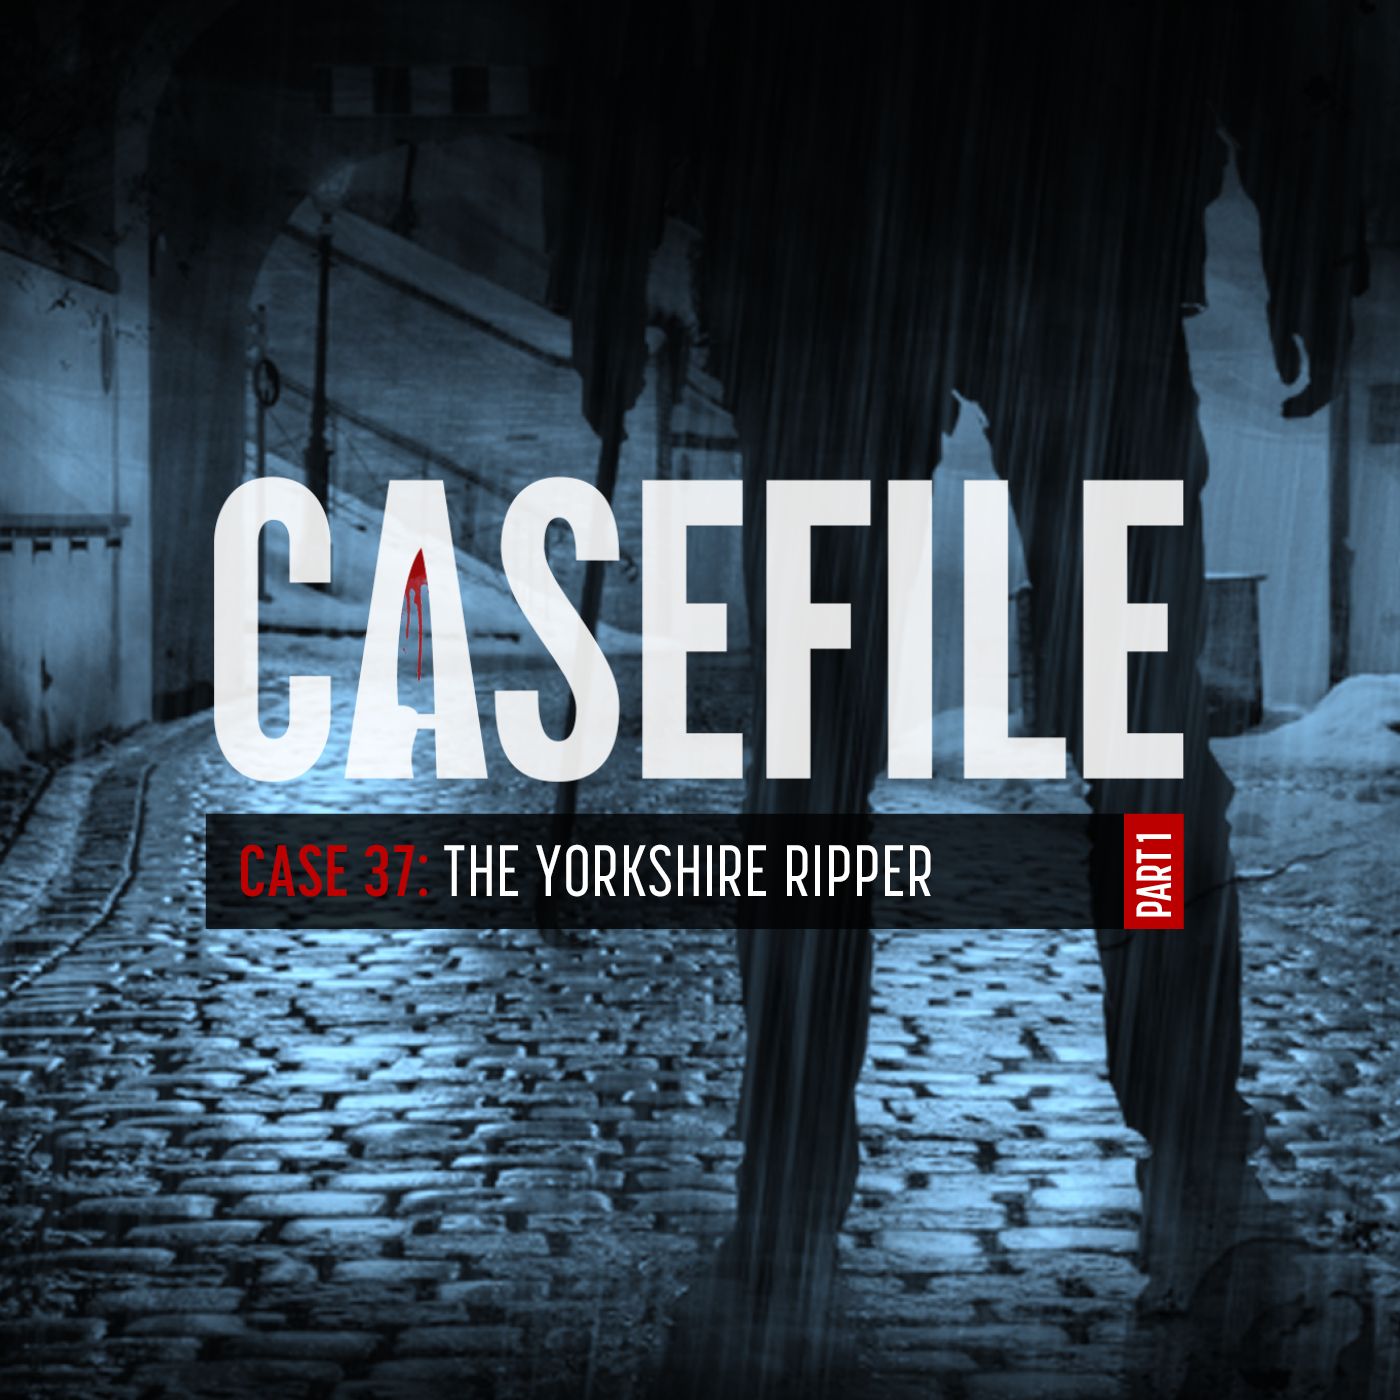 Case 37: The Yorkshire Ripper (Part 1)